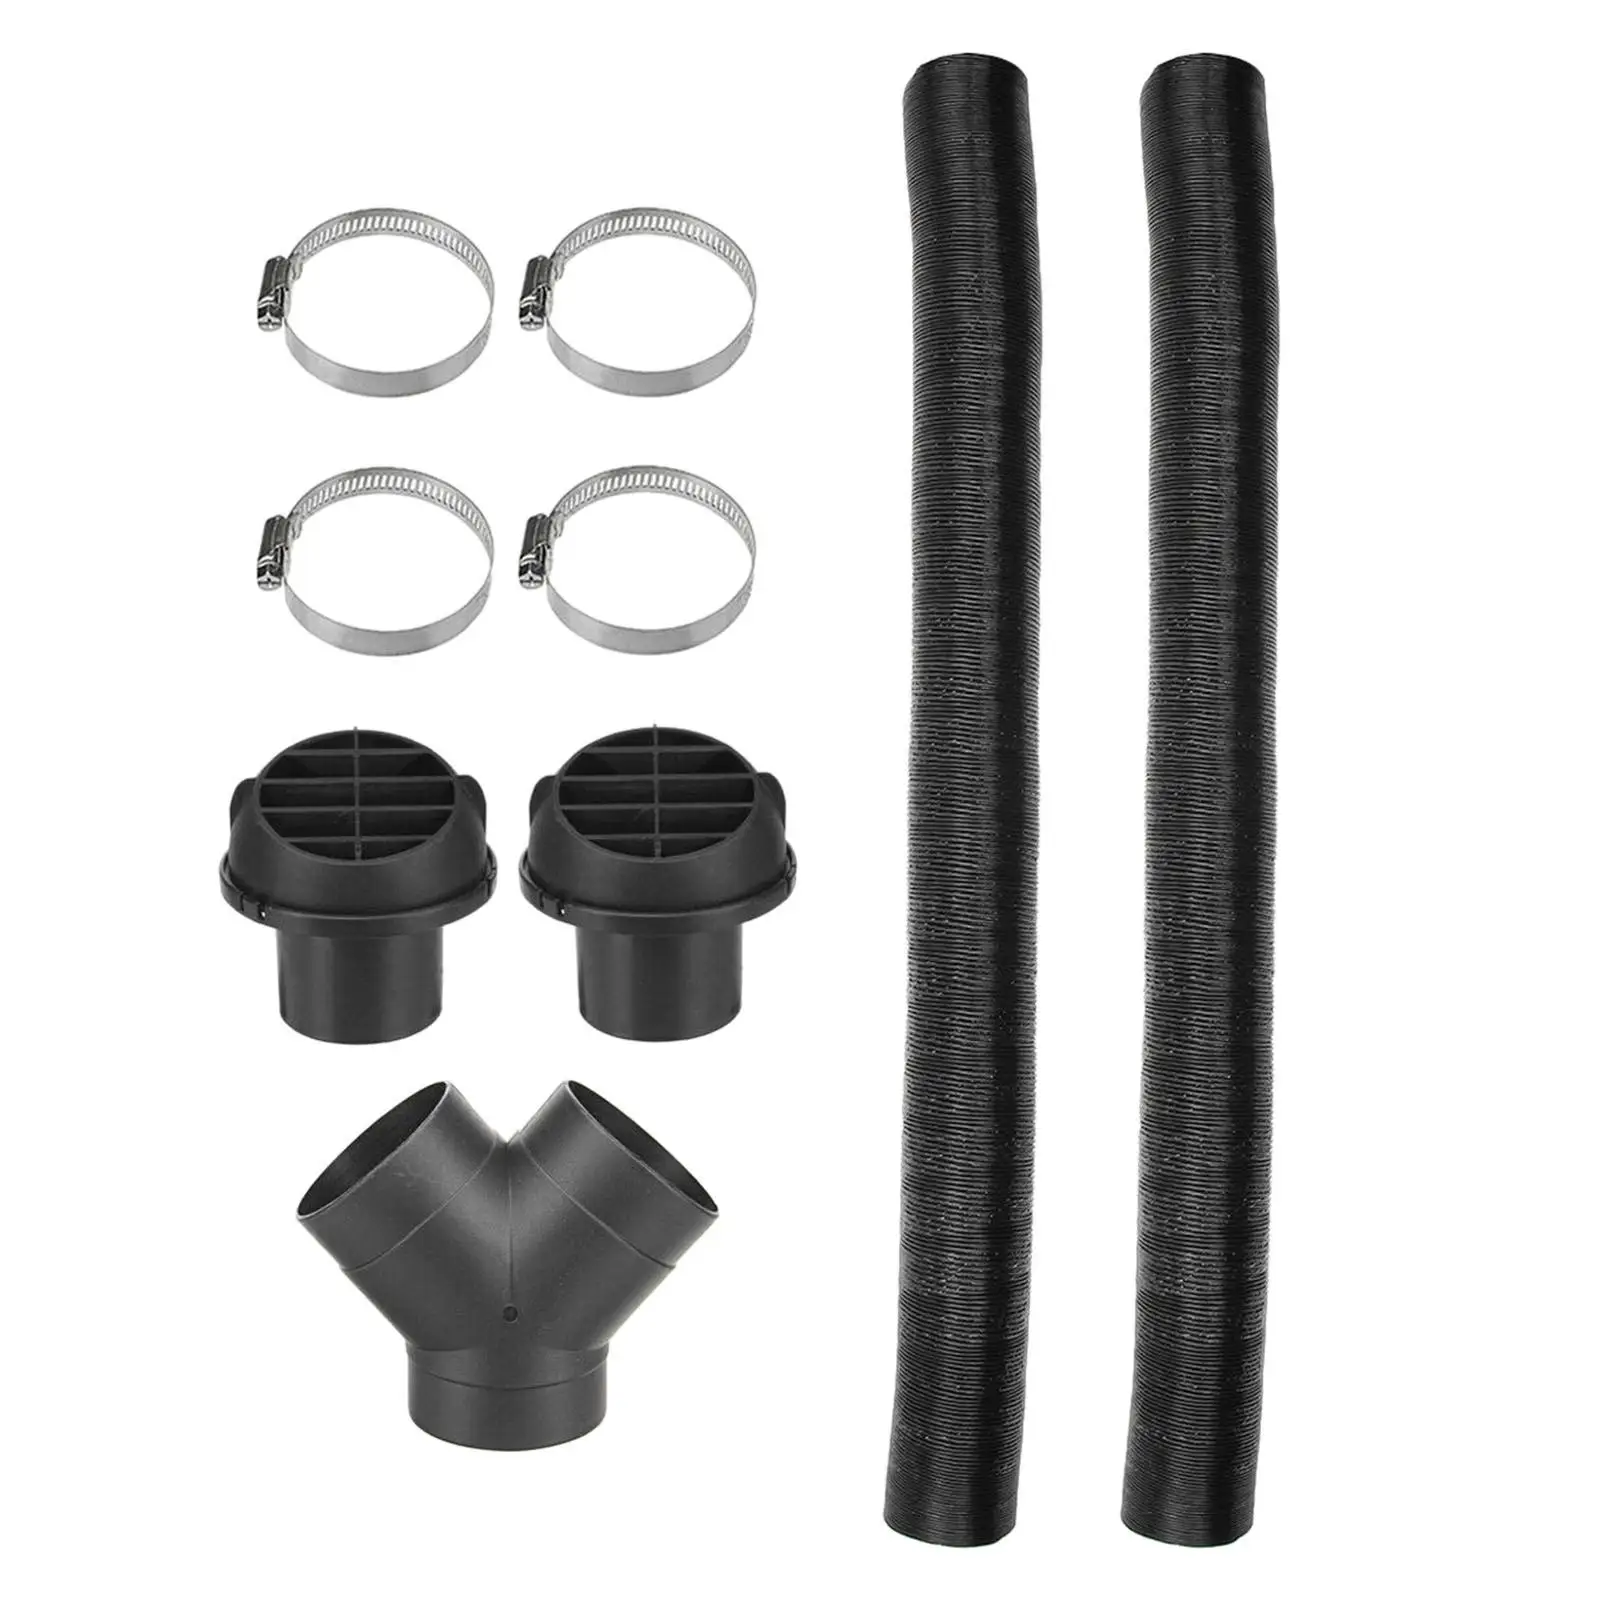 75mm Pipe Ducting Piece + Warm Air Outlet Vent +Hose Clip for Carl Heater